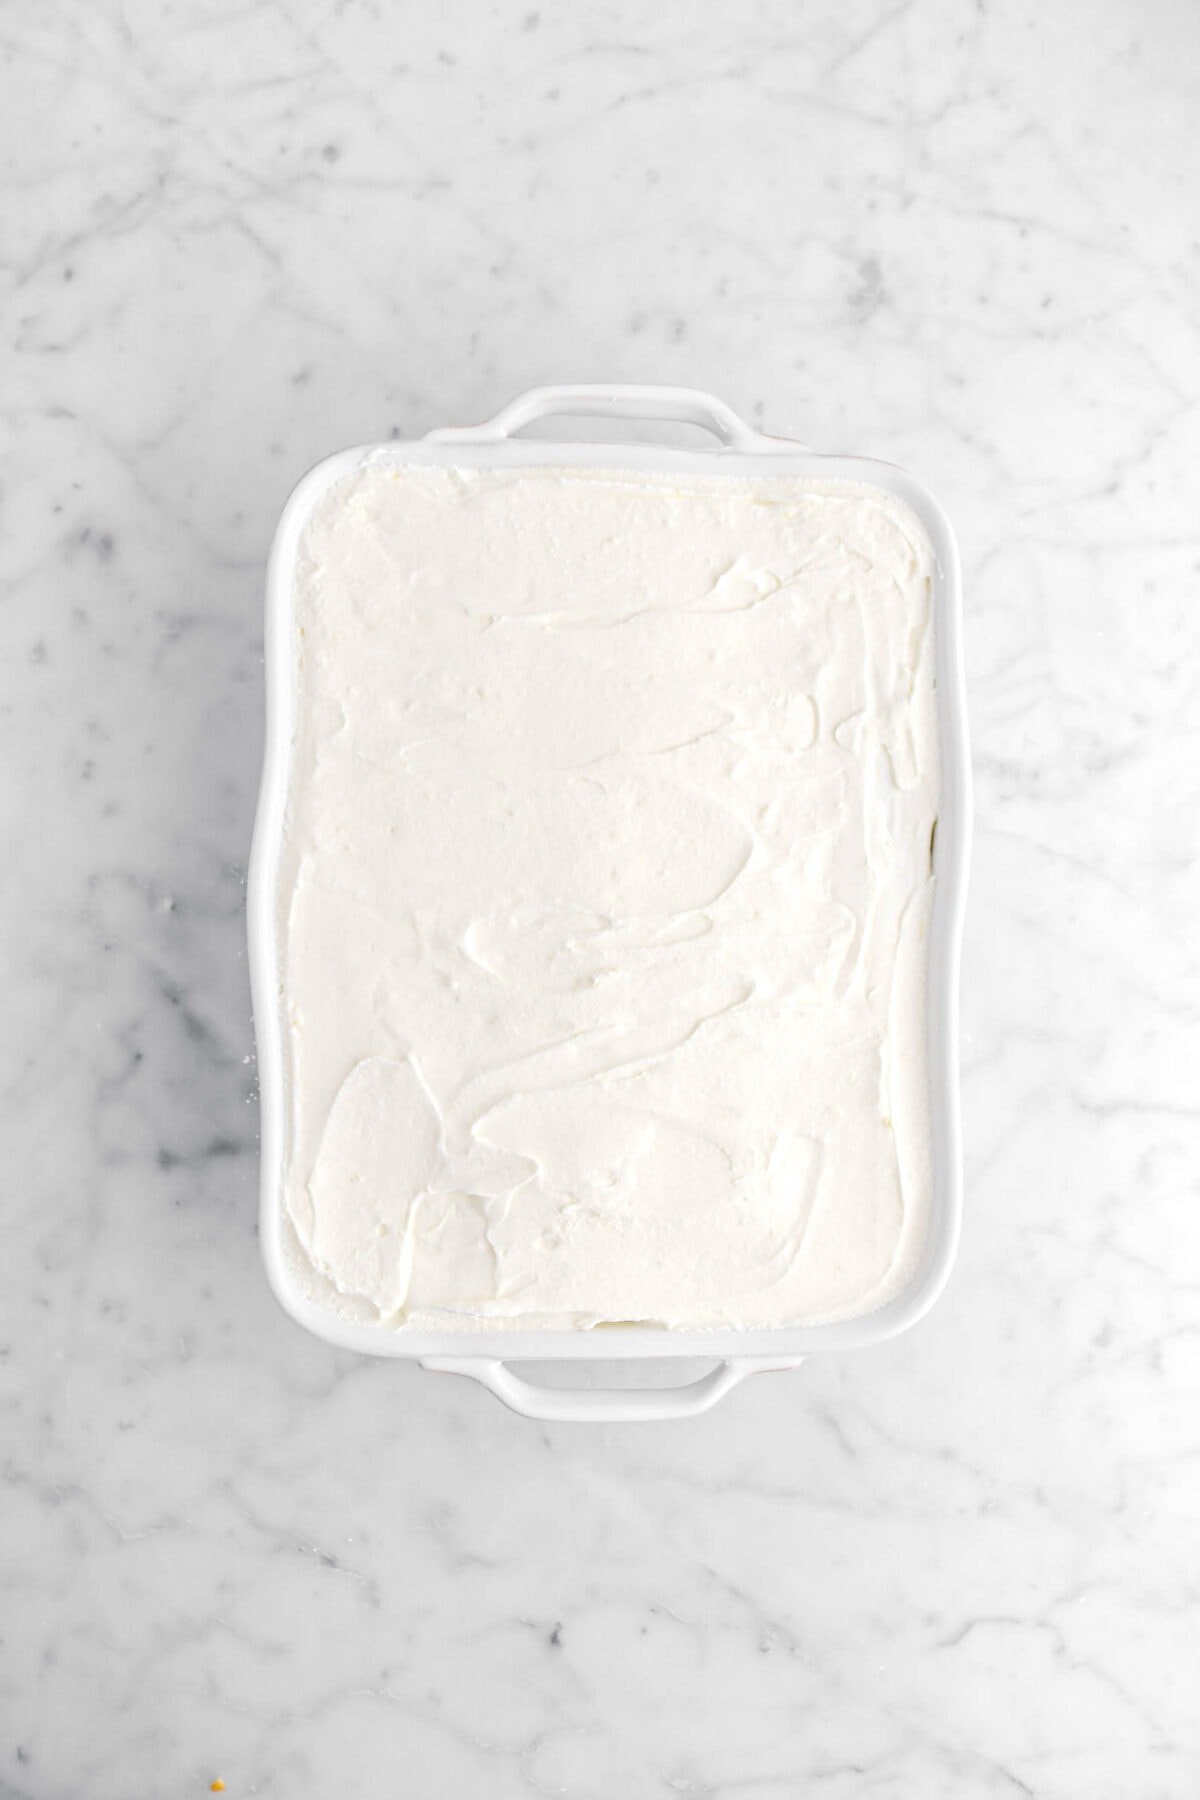 whipped cream spread across ladyfinger layer in white casserole.